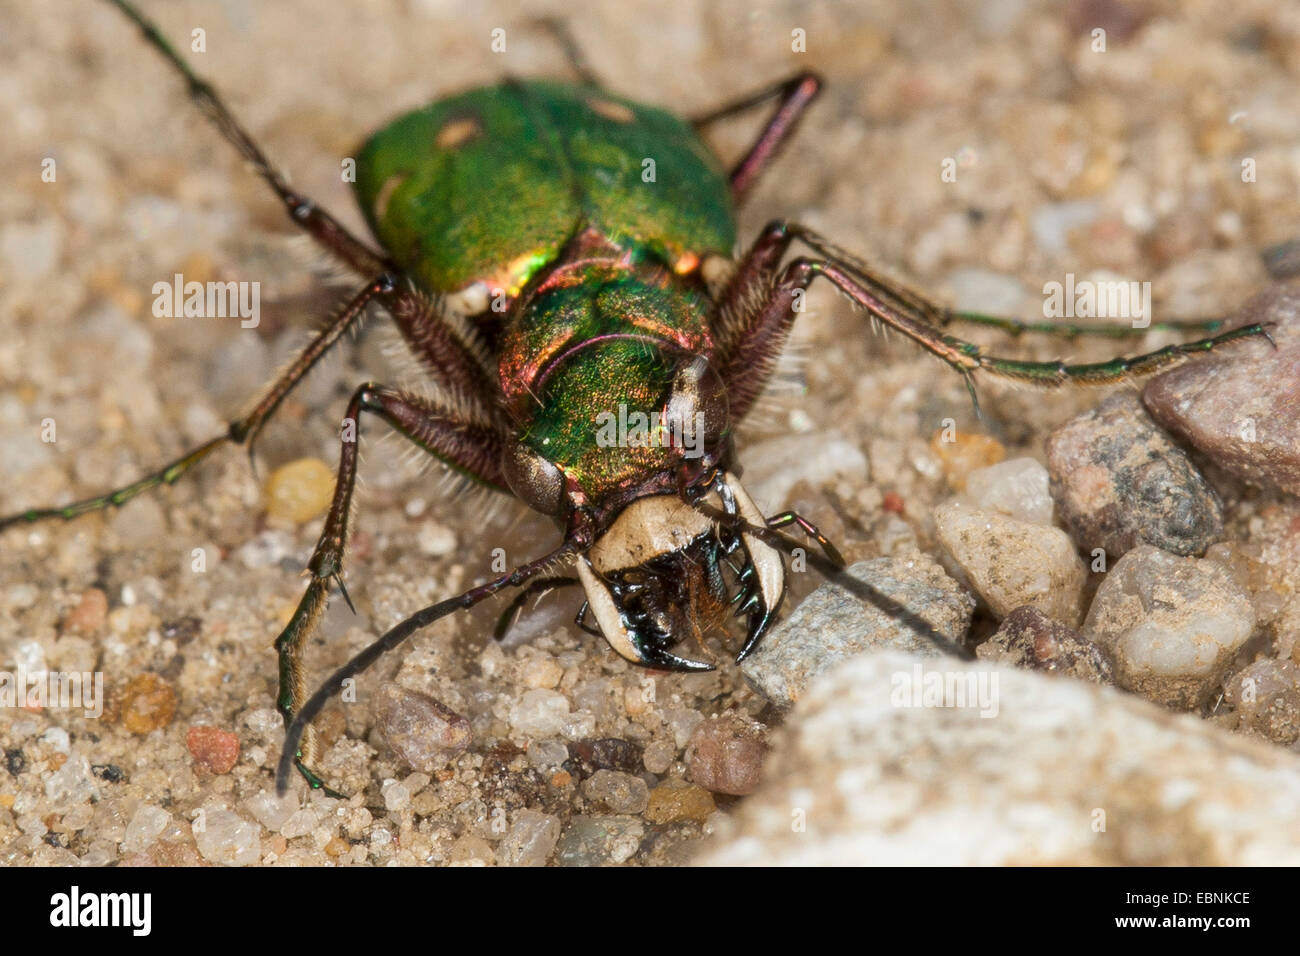 Green tiger beetle (Cicindela campestris), front view with mouthparts, Germany Stock Photo